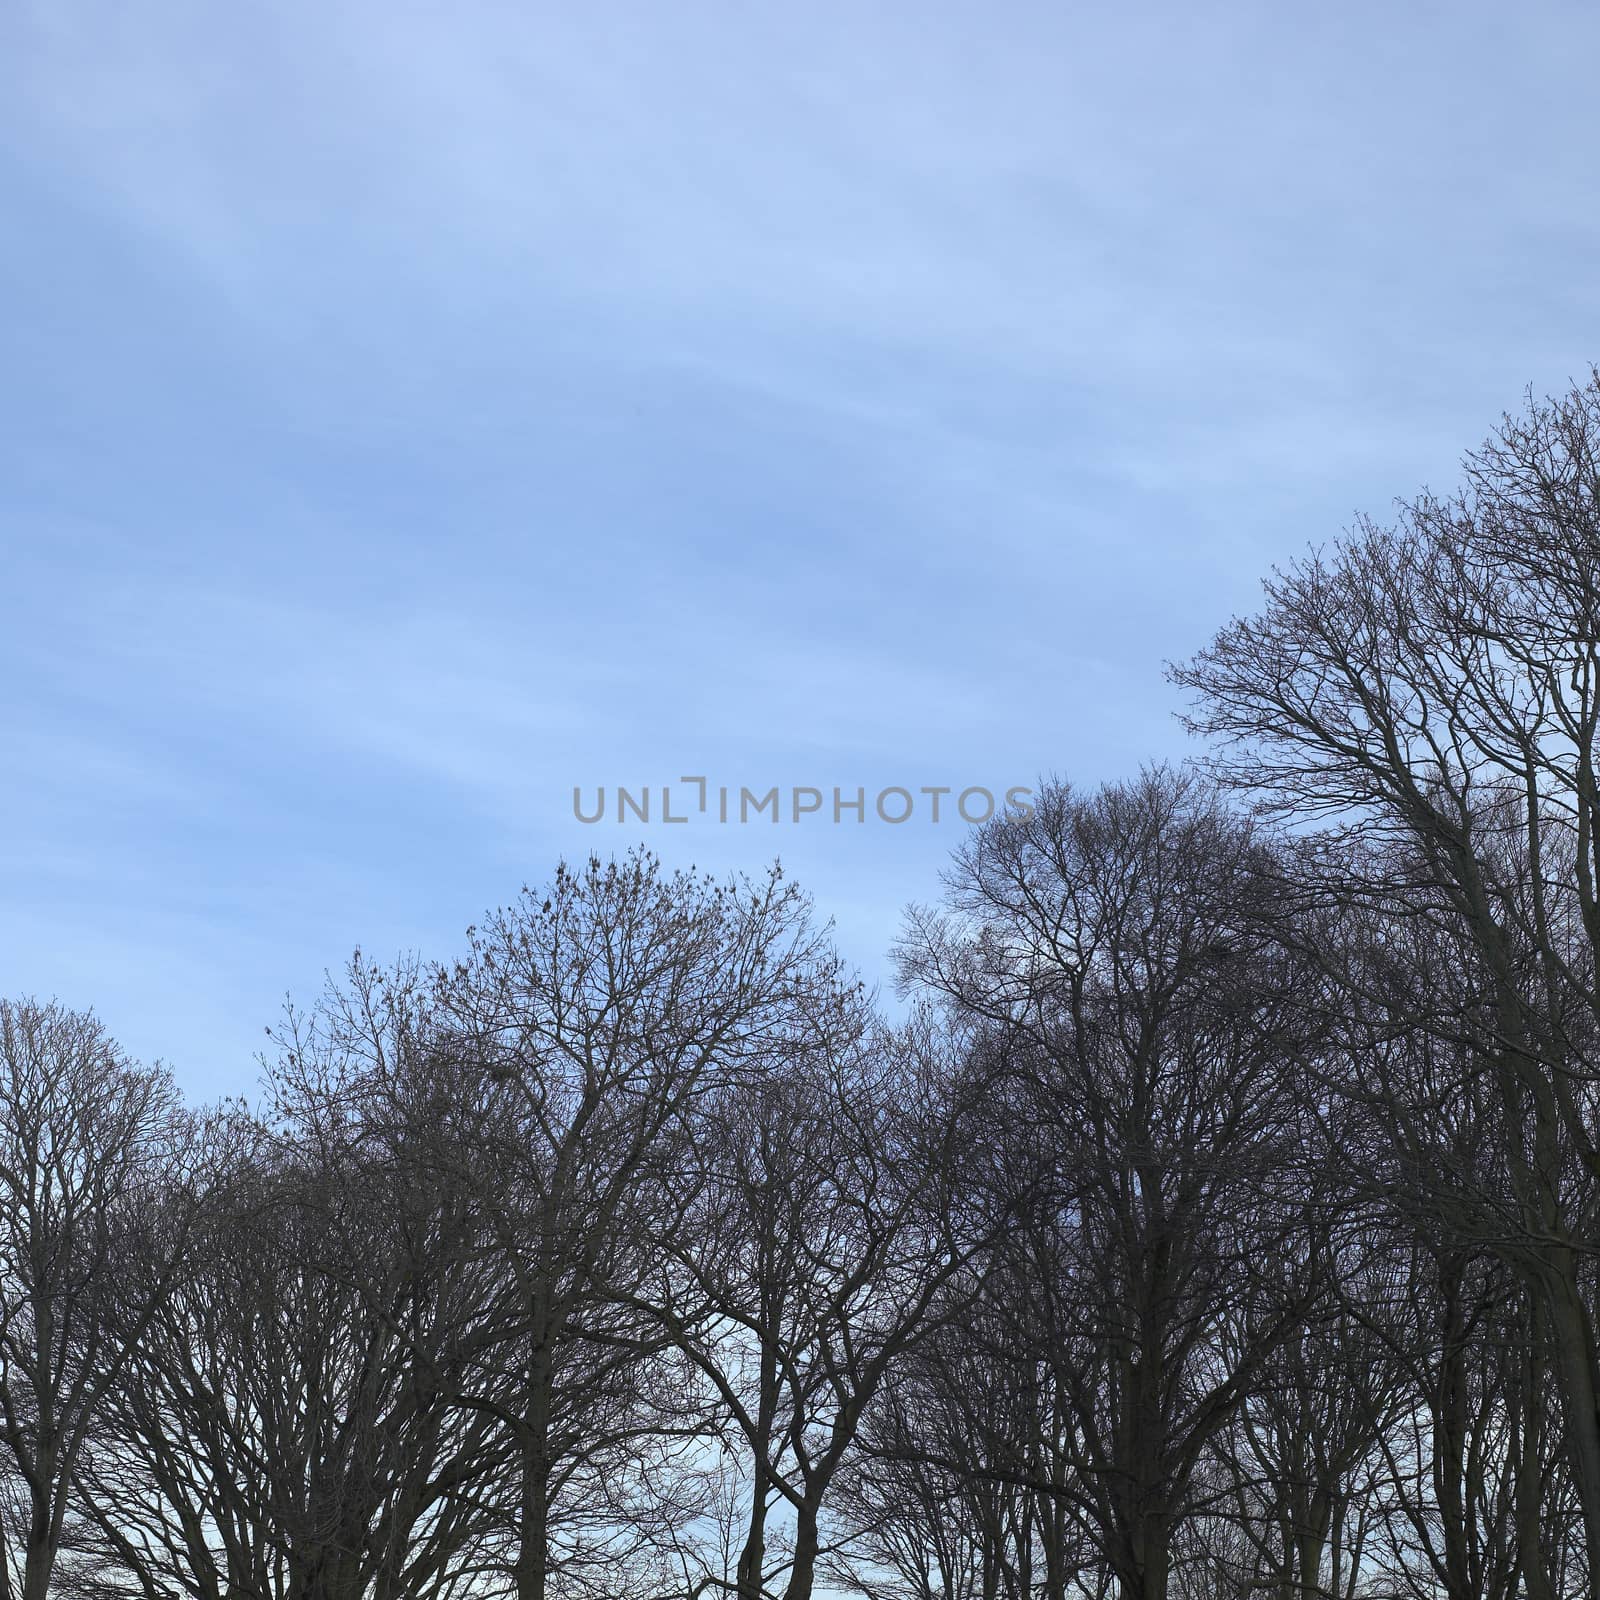 Bare branches of a leafless tree against a misty blue sky